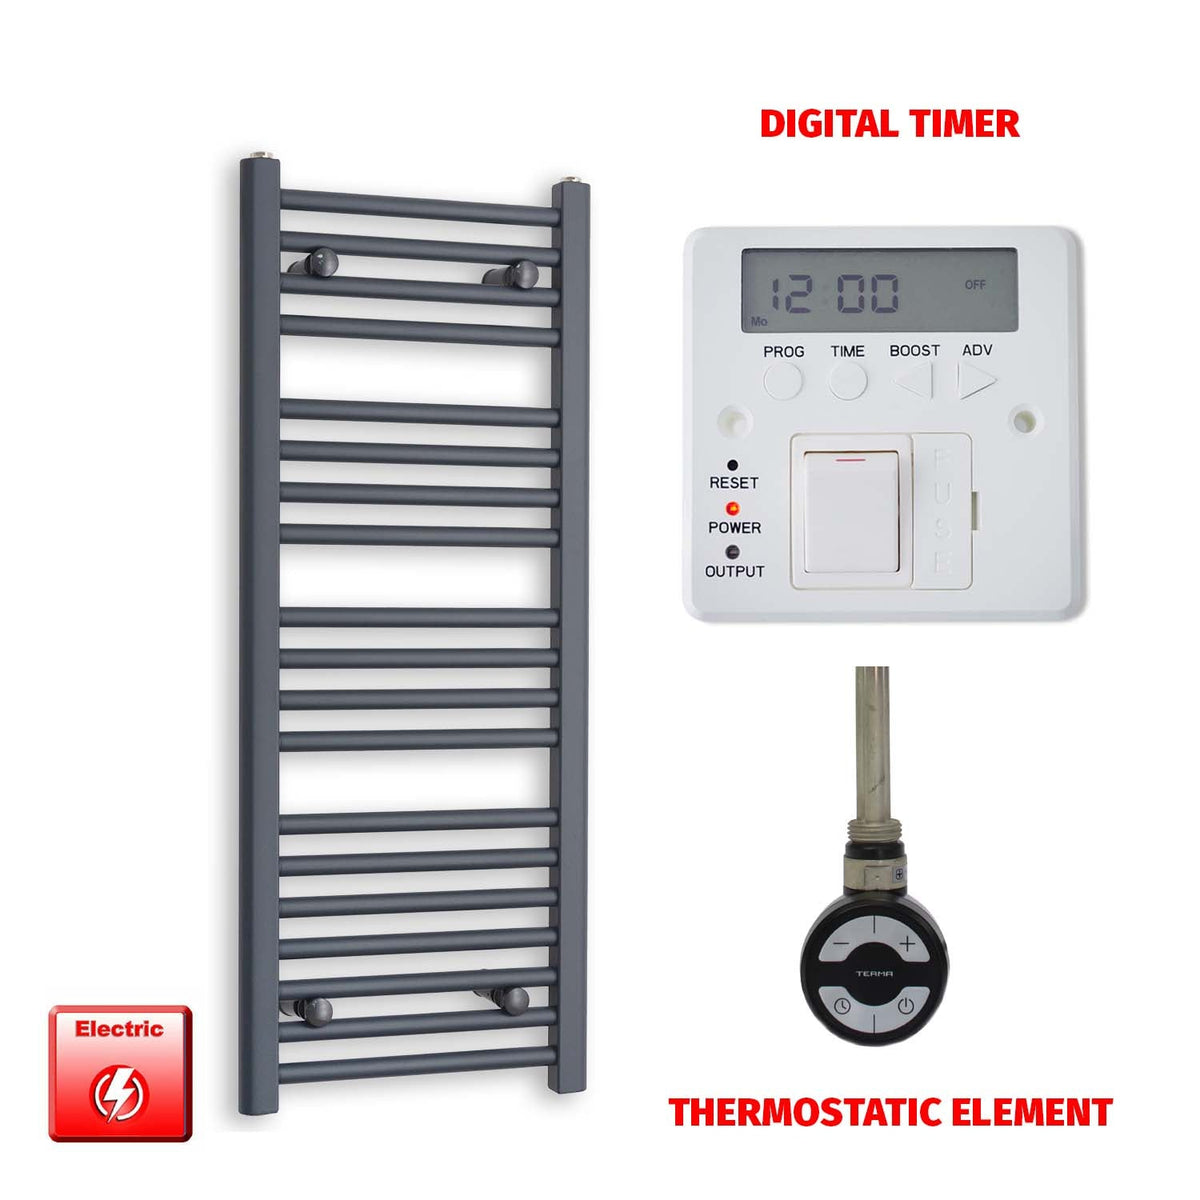 1000 x 400 Flat Anthracite Pre-Filled Electric Heated Towel Radiator HTR MOA Thermostatic element Digital timer